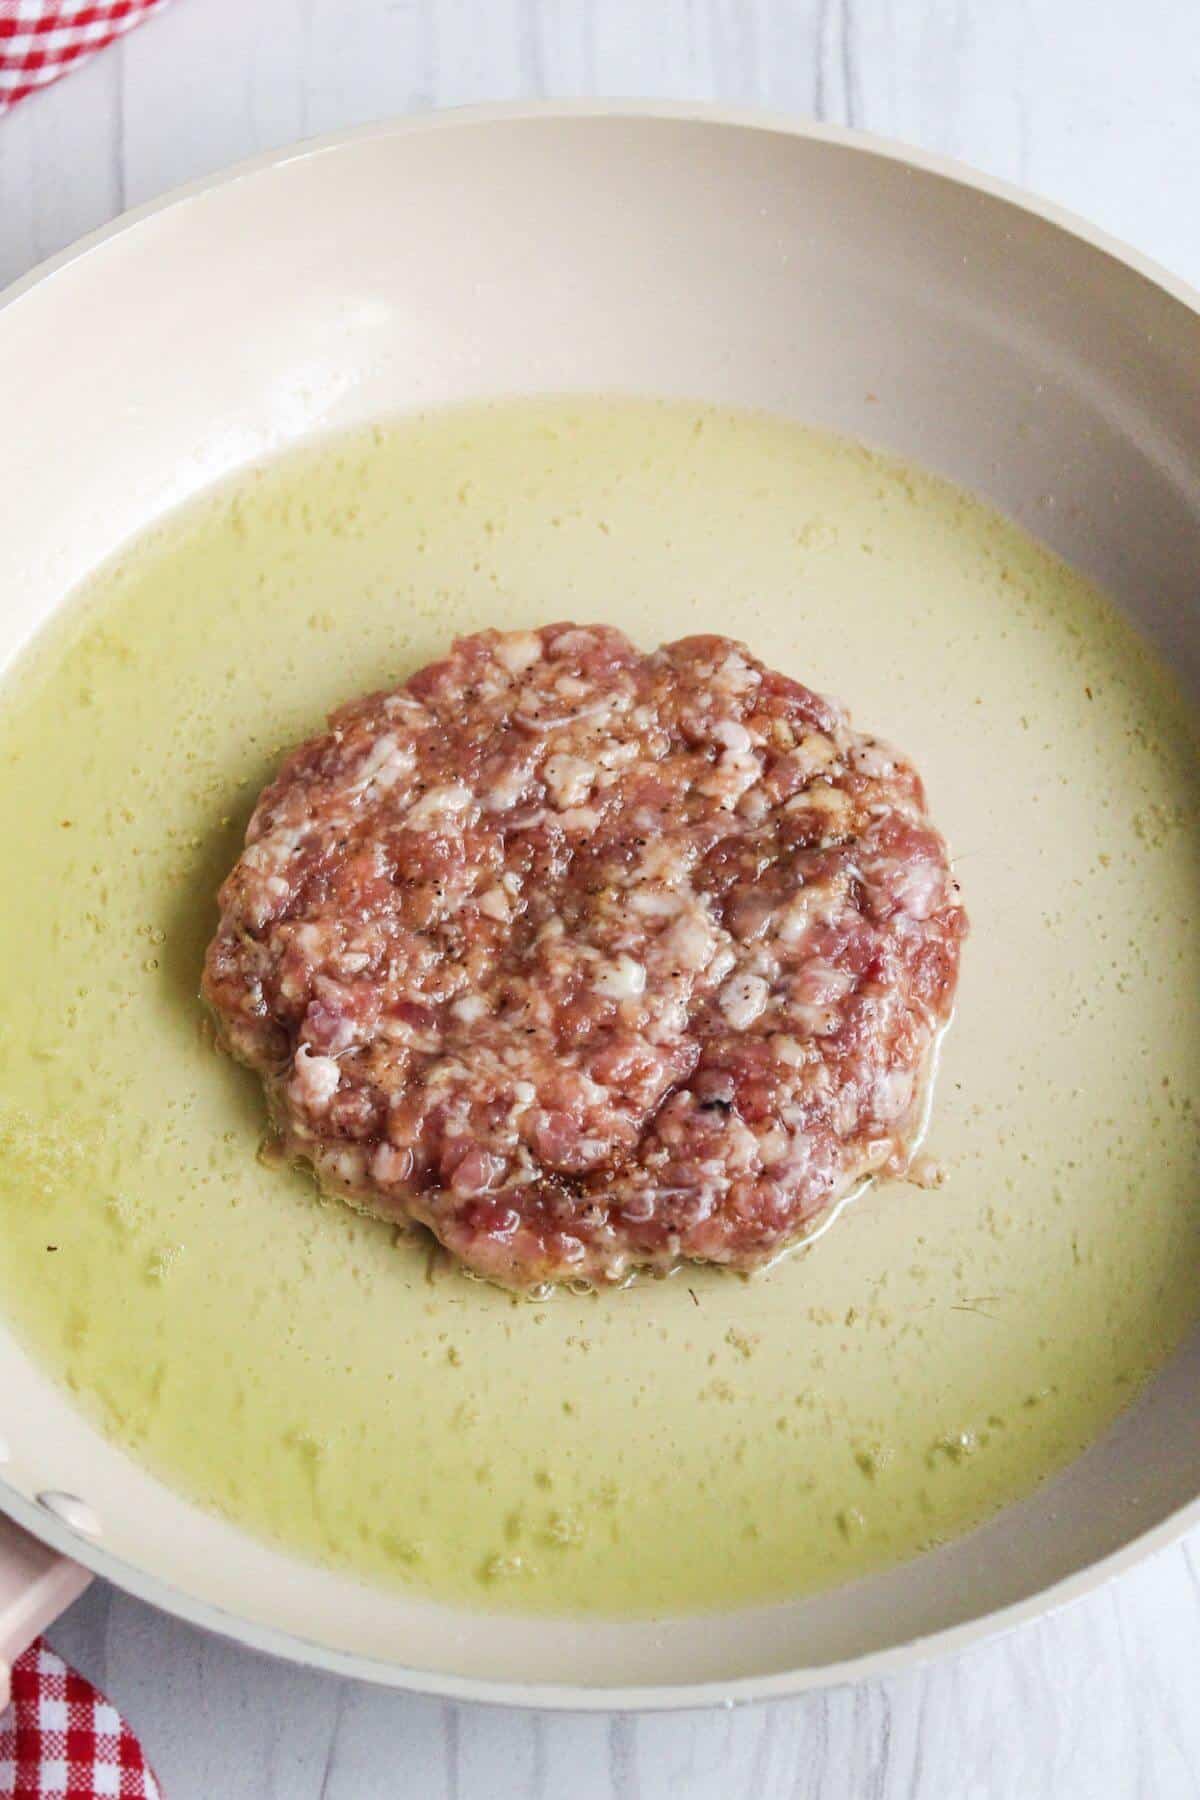 A raw ground pork burger in a frying pan with oil.